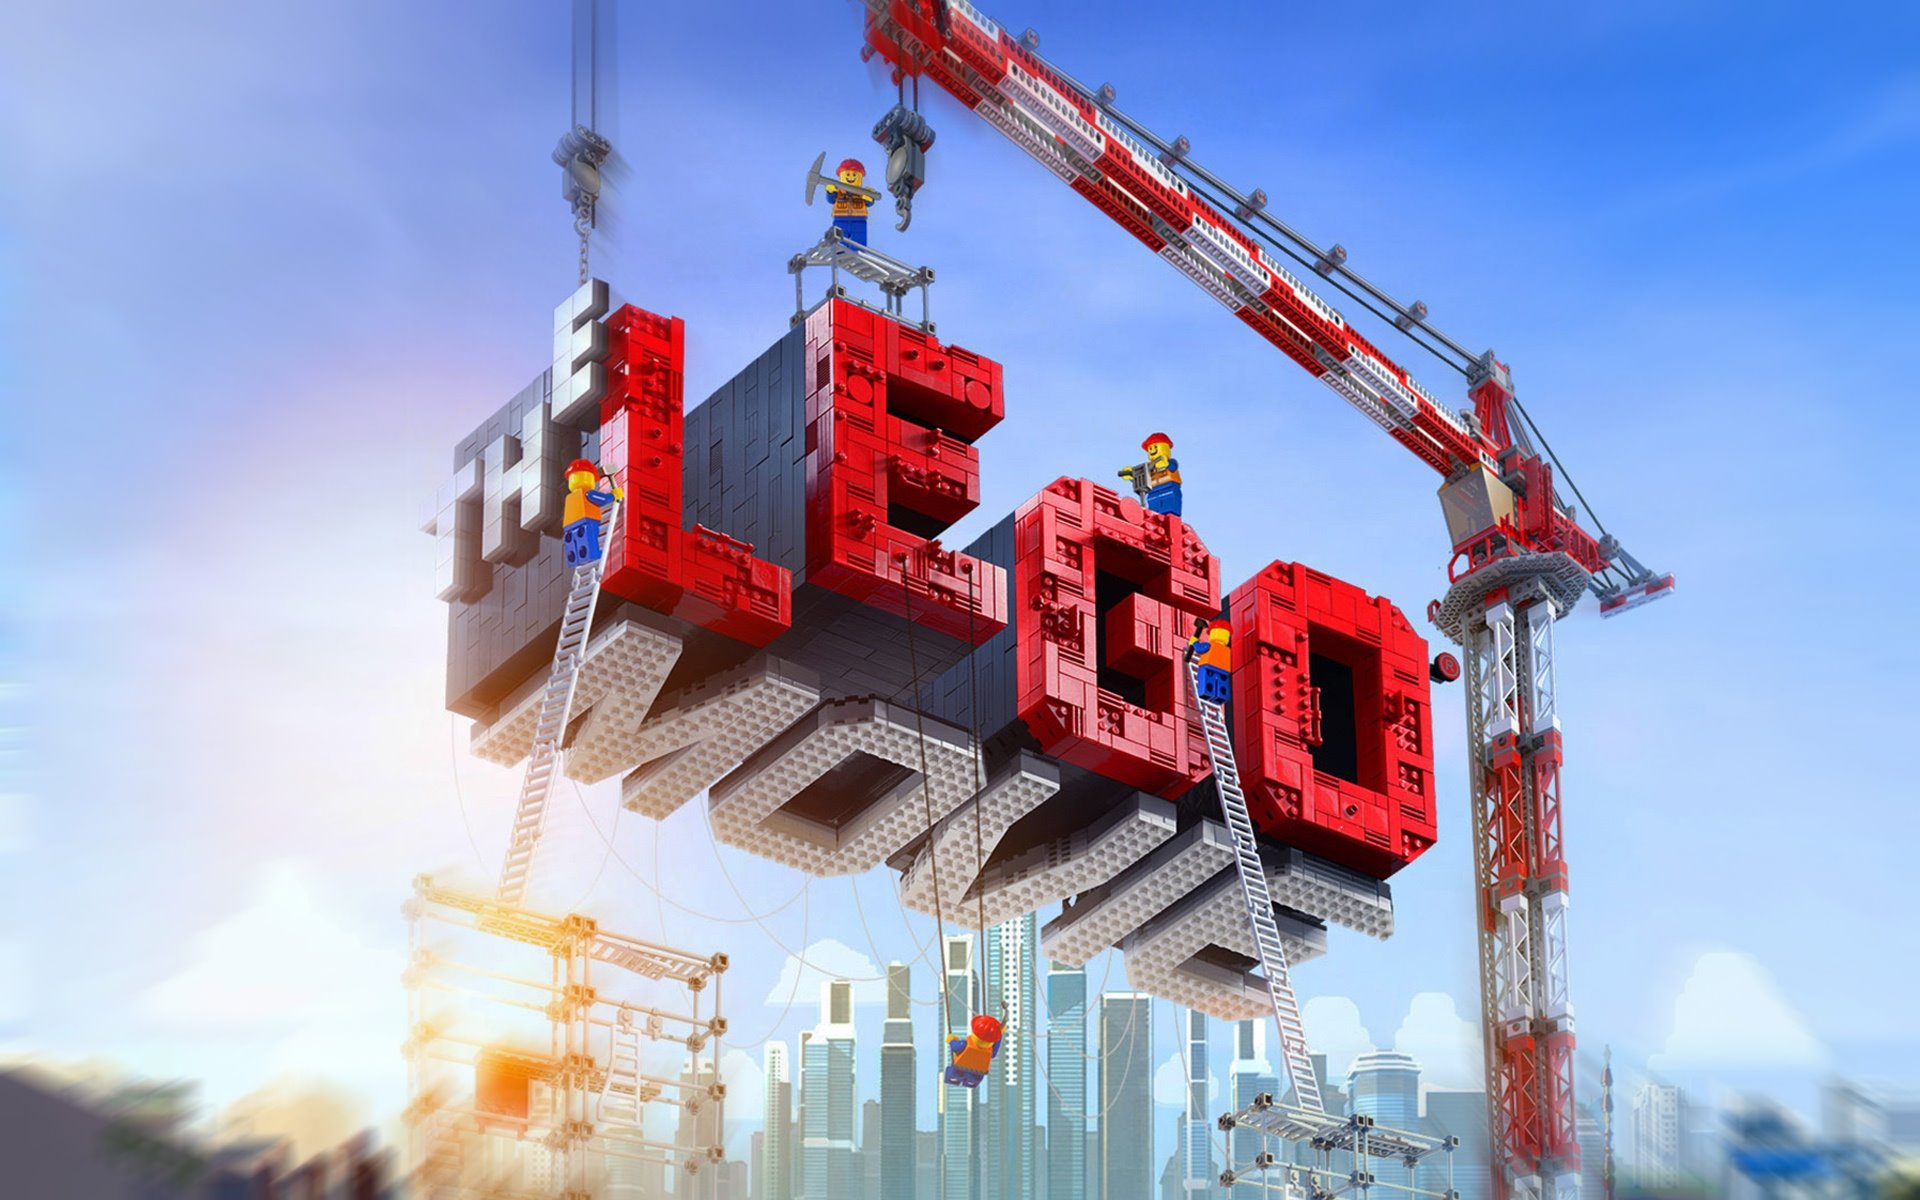 Movies Wallpapers The Lego Movie Wallpaper 10130 1920x1200 pixel